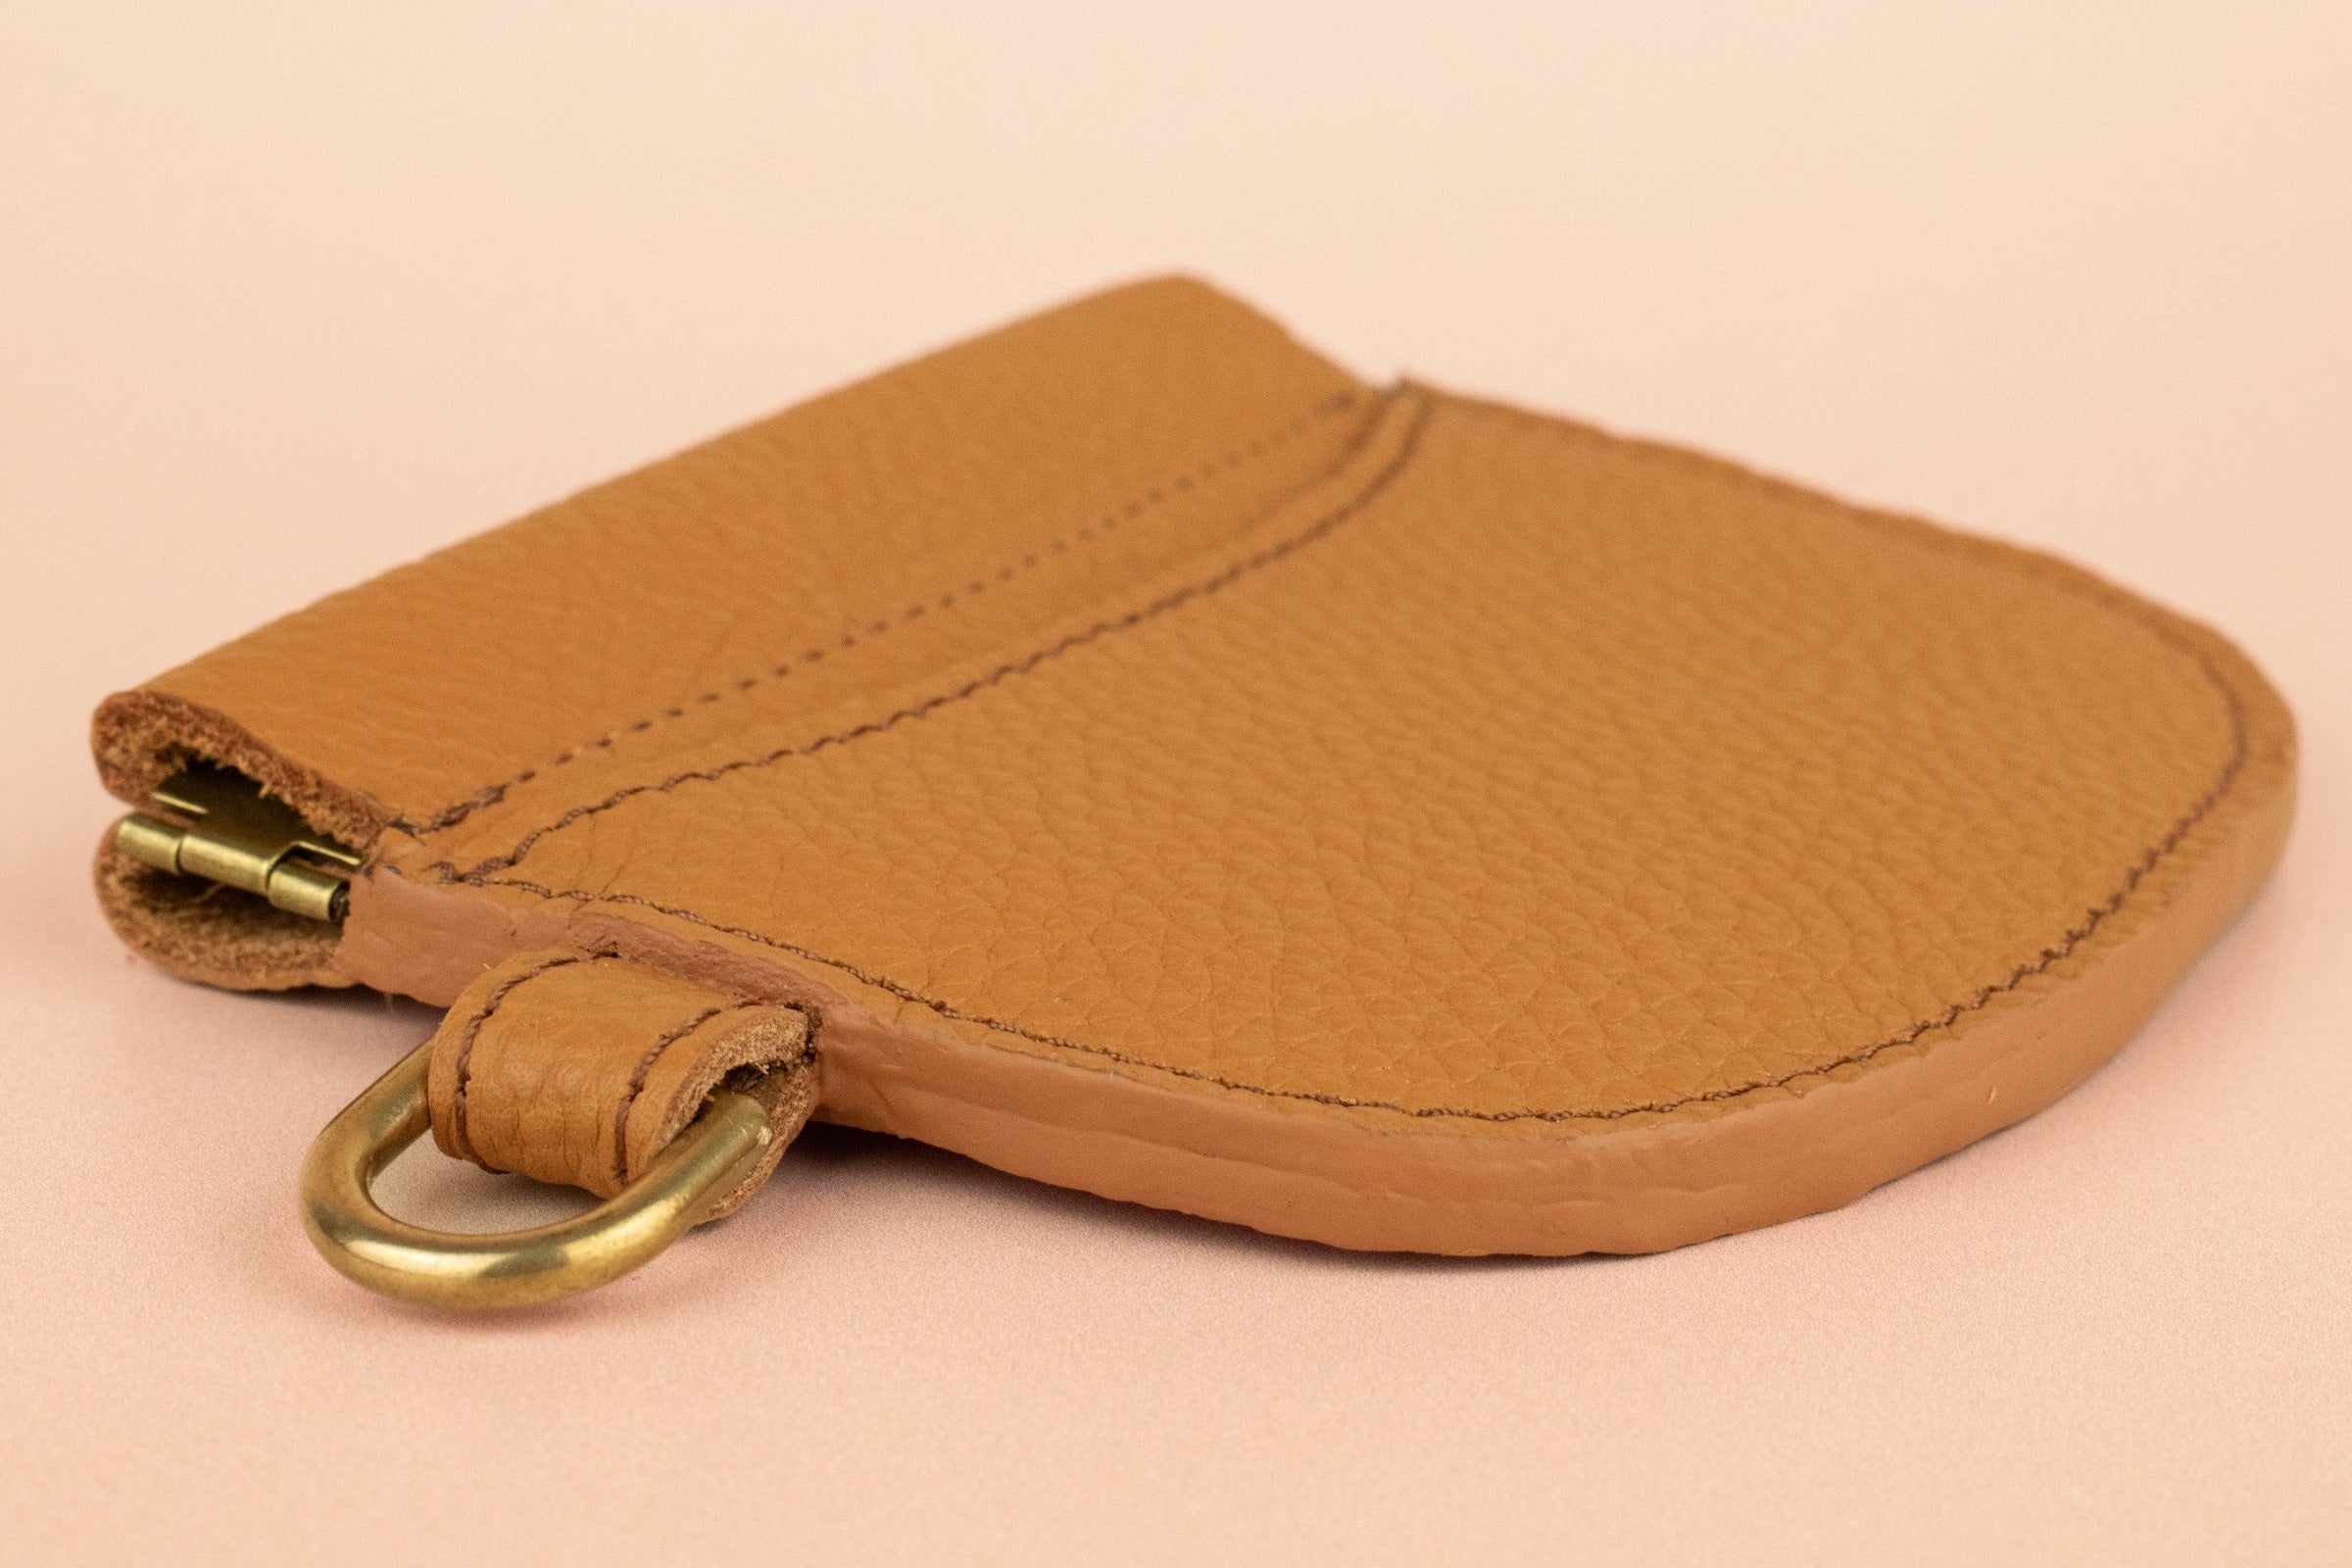 slim neutral compact leather wallet wristlet with exterior card pocket with gold hardware handmade by cold gold 